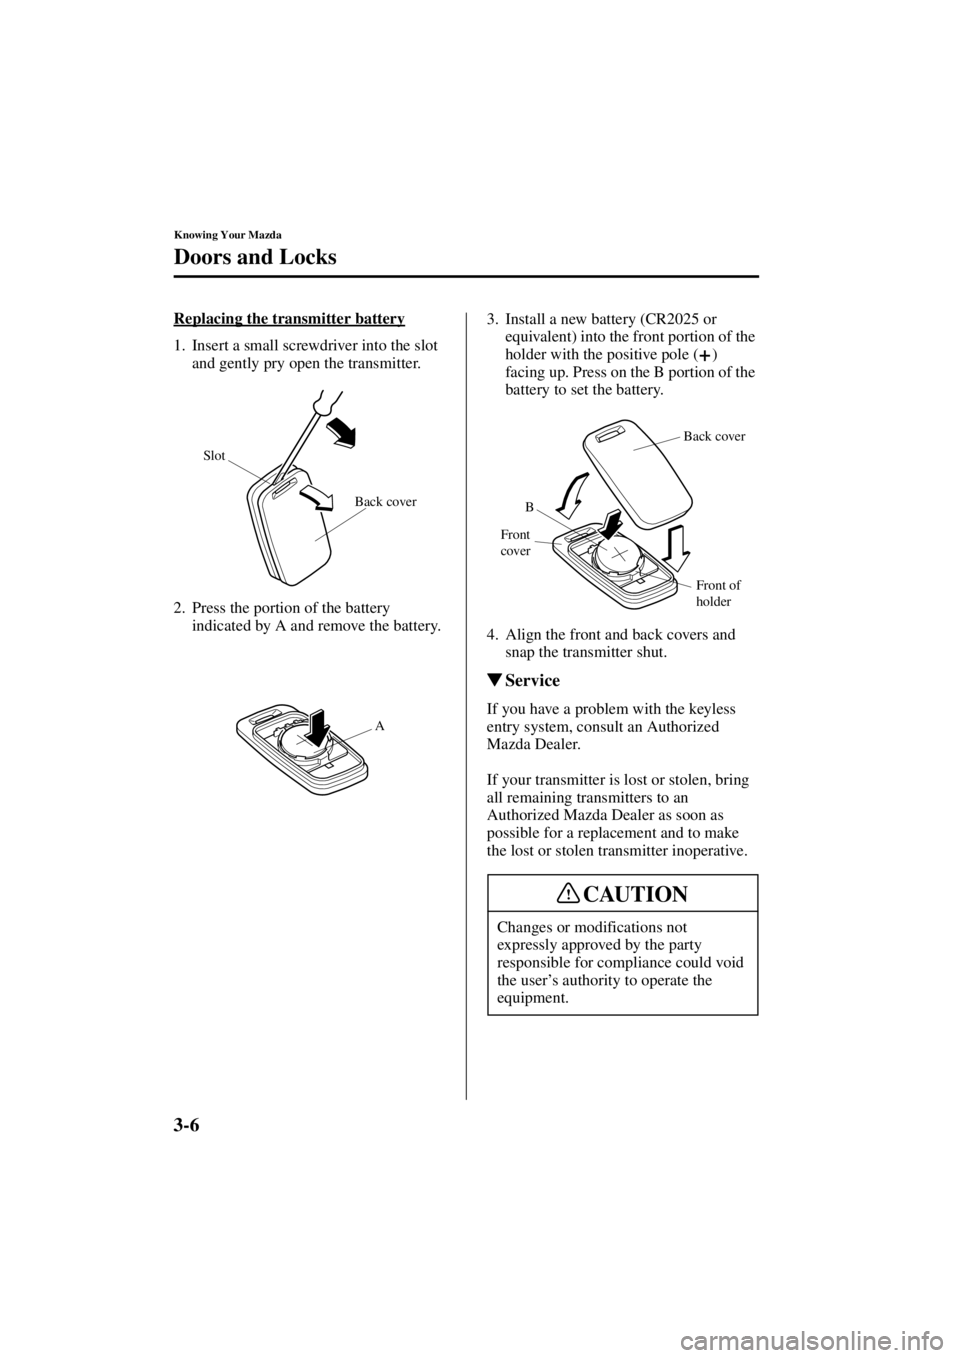 MAZDA MODEL 3 4-DOOR 2004  Owners Manual 3-6
Knowing Your Mazda
Doors and Locks
Form No. 8S18-EA-03I
Replacing the transmitter battery
1. Insert a small screwdriver into the slot and gently pry open the transmitter.
2. Press the portion of t